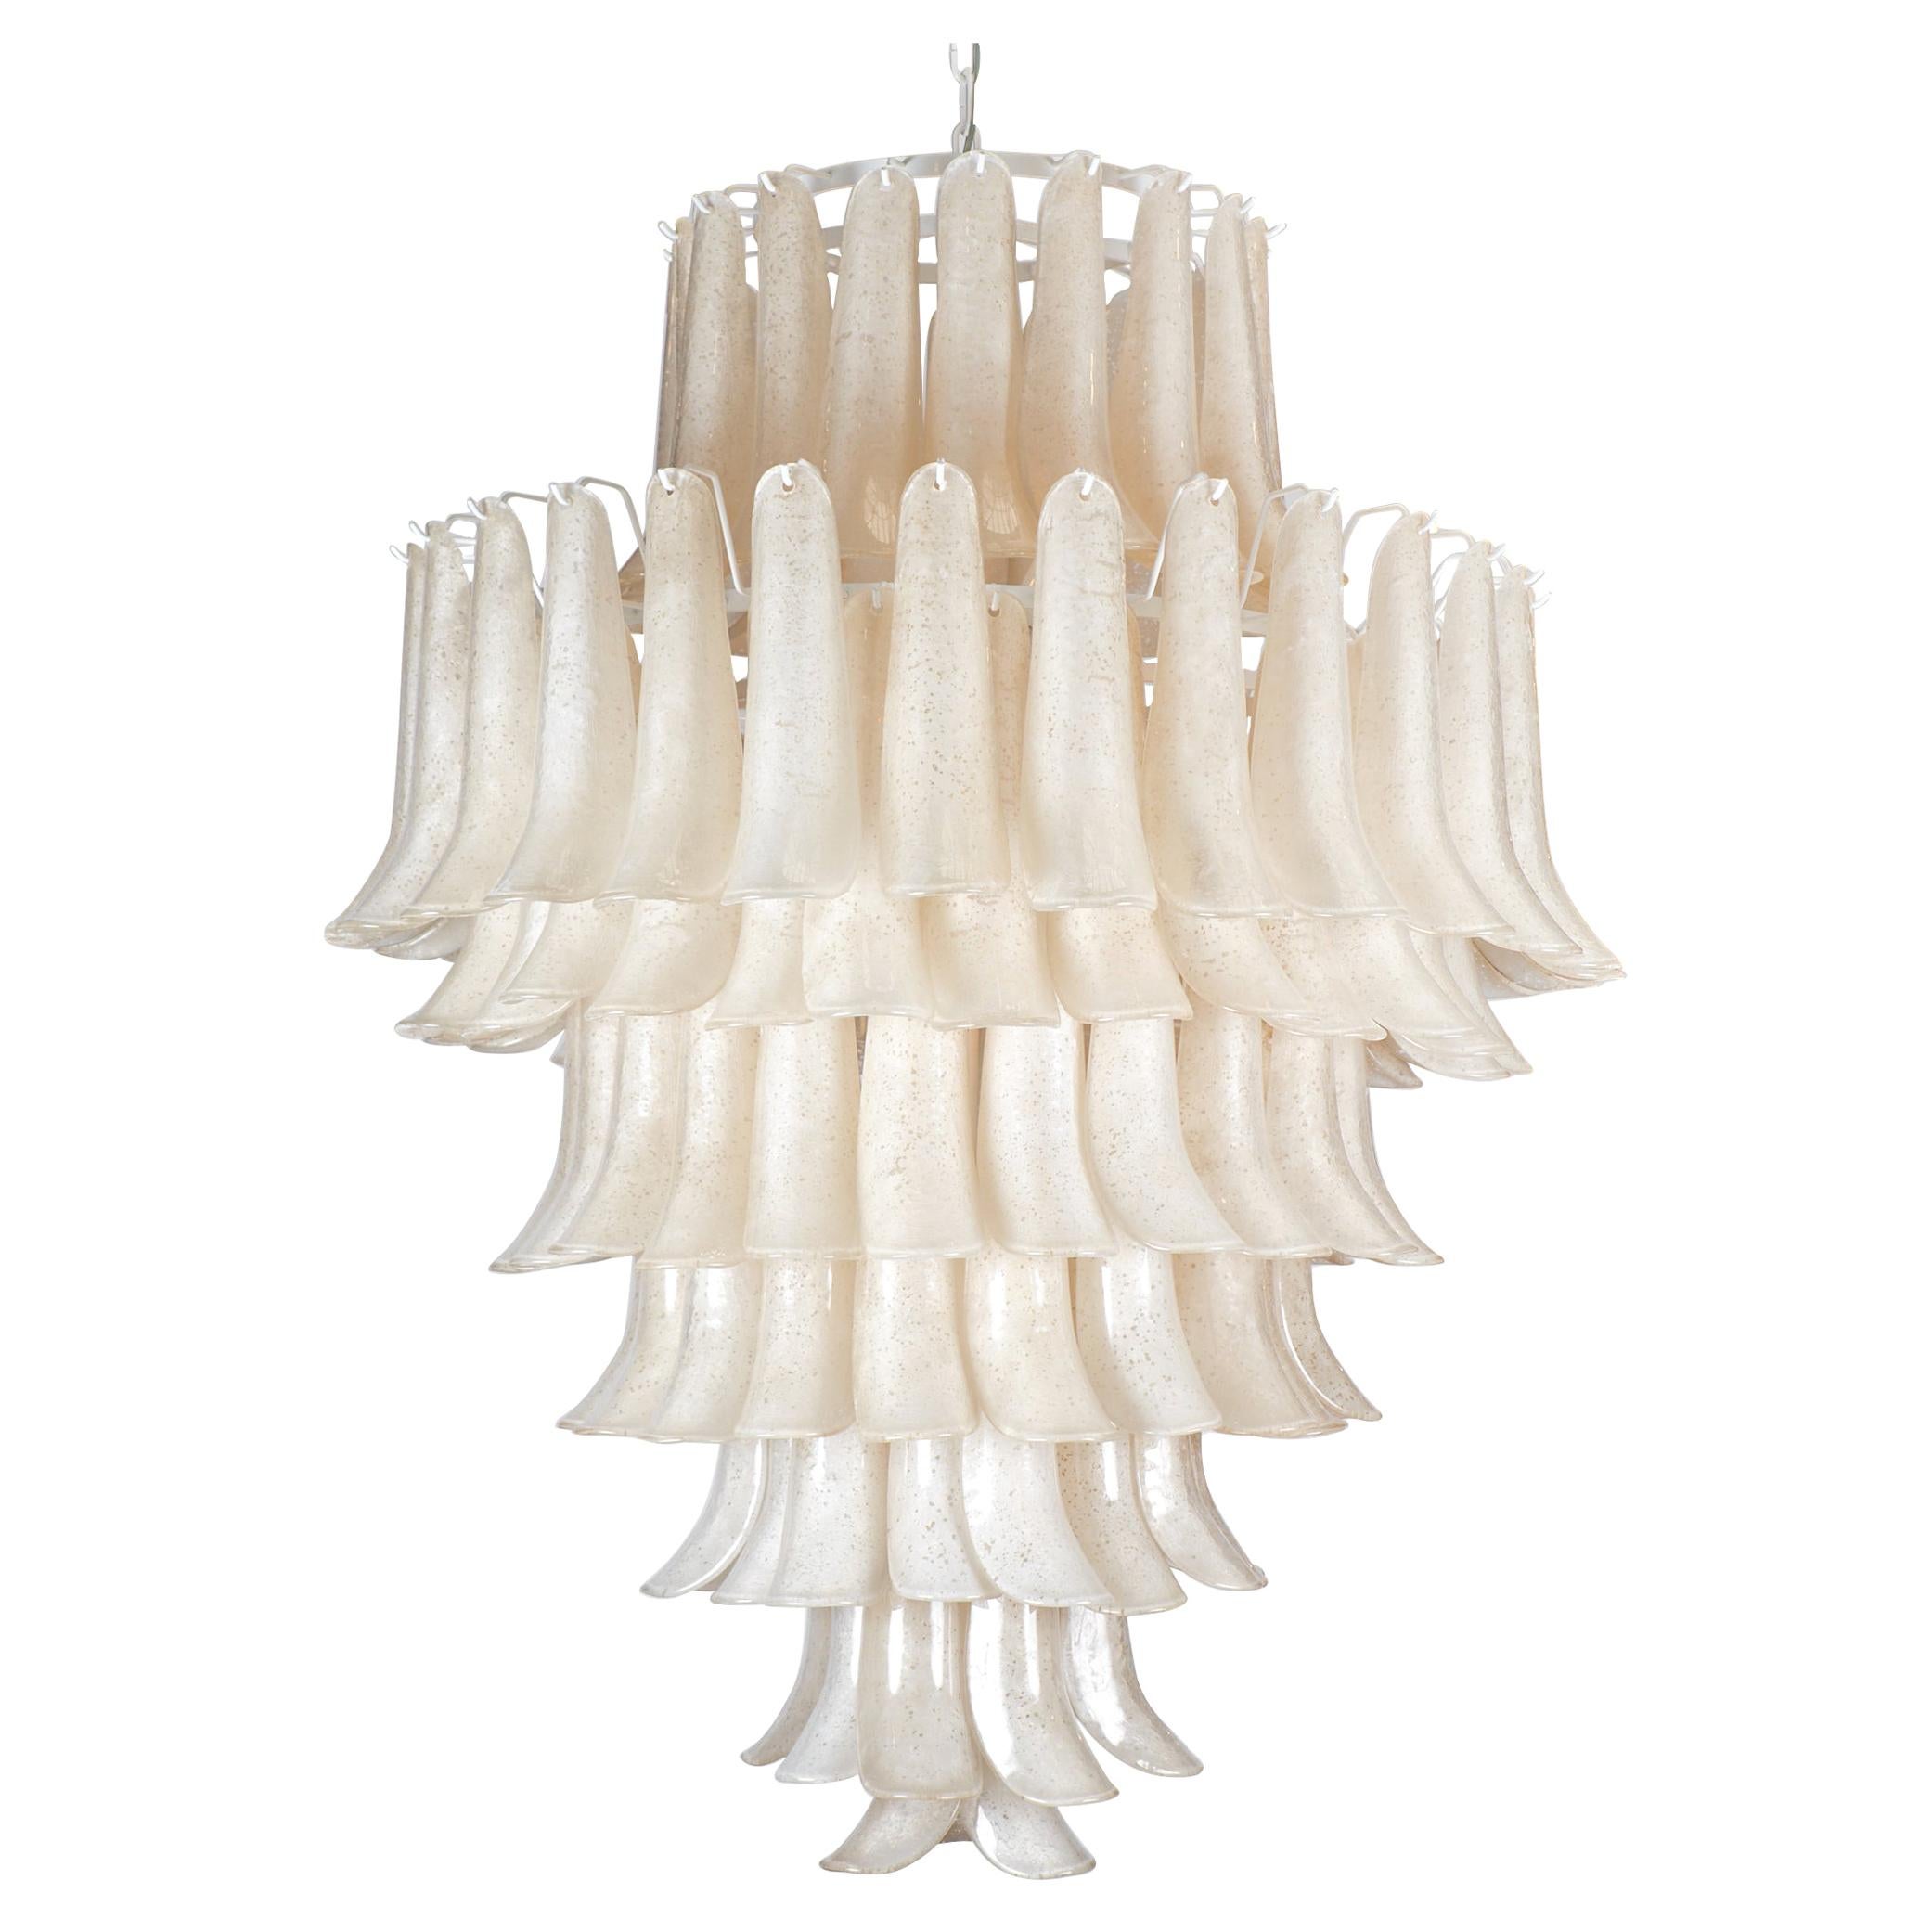 Murano "Scavo" Glass Selle Chandelier For Sale